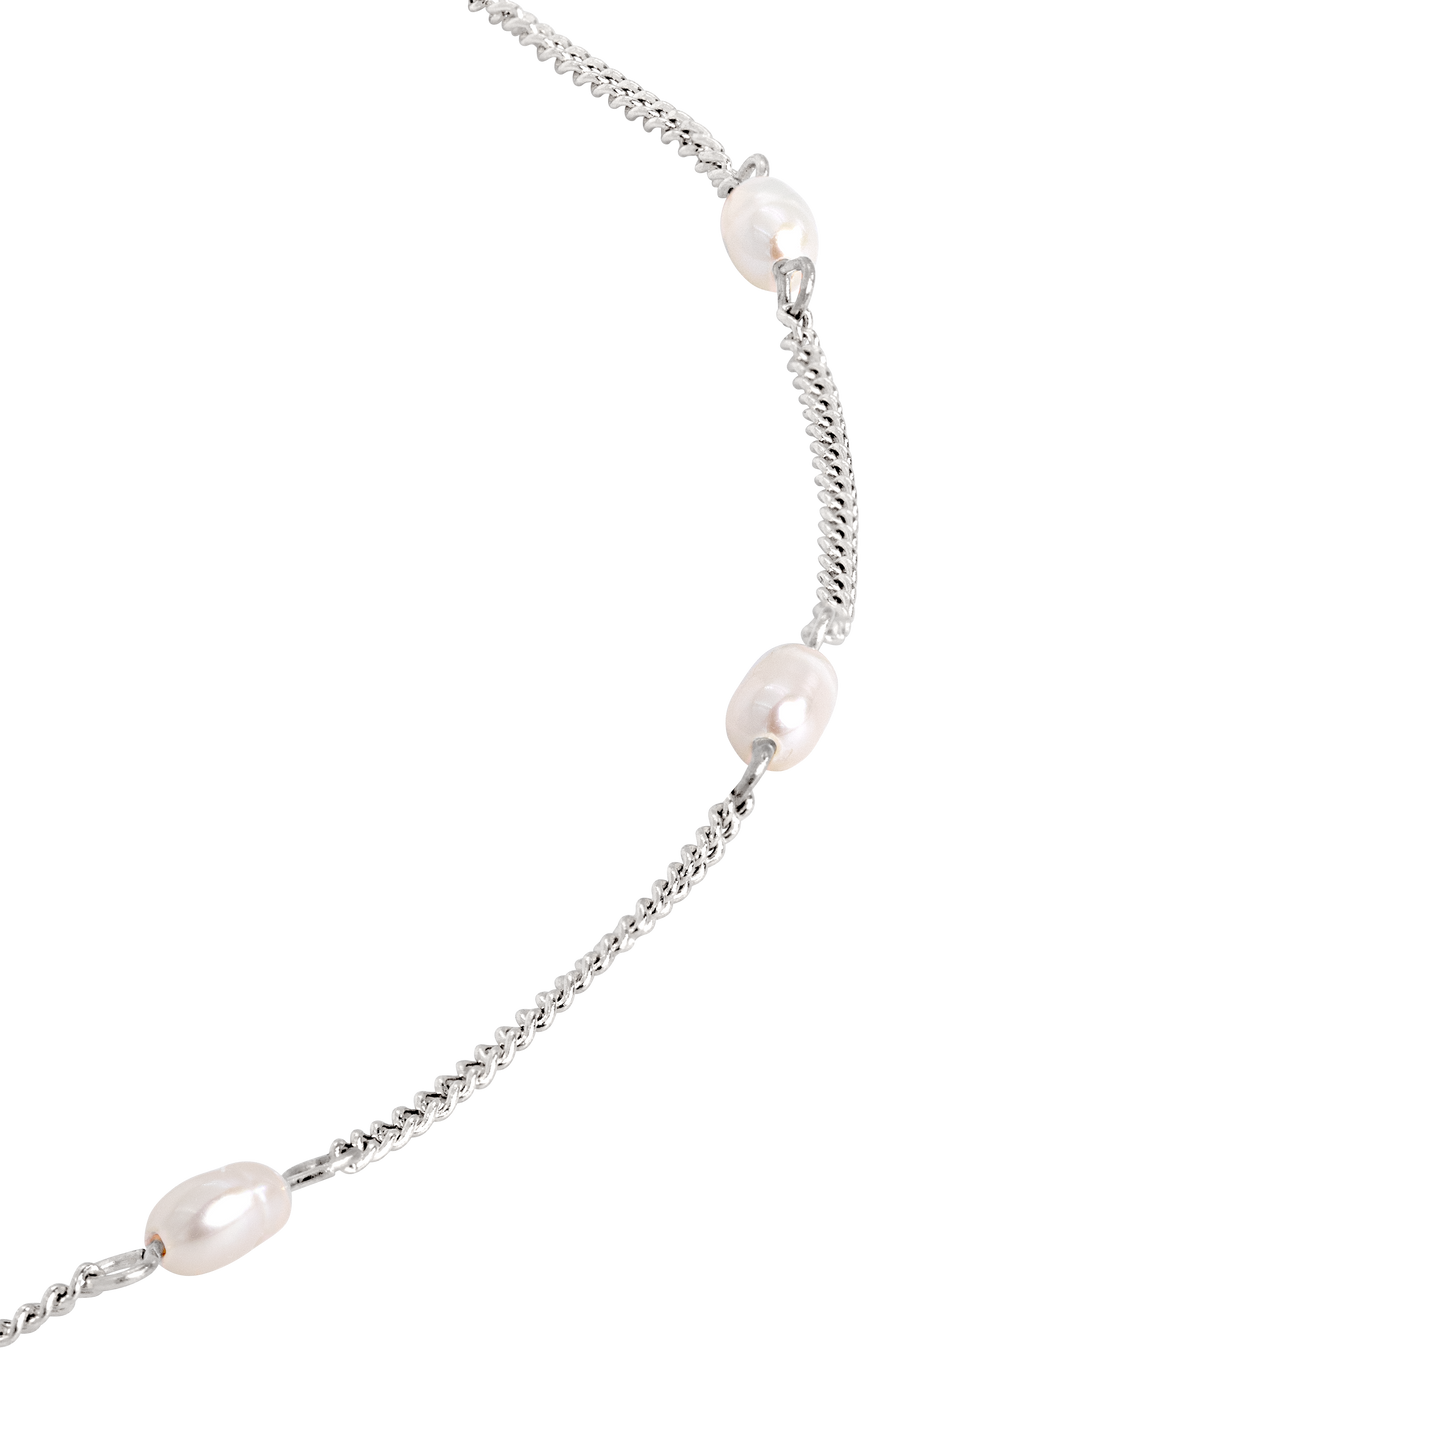 Pearl after Pearl Choker Argento